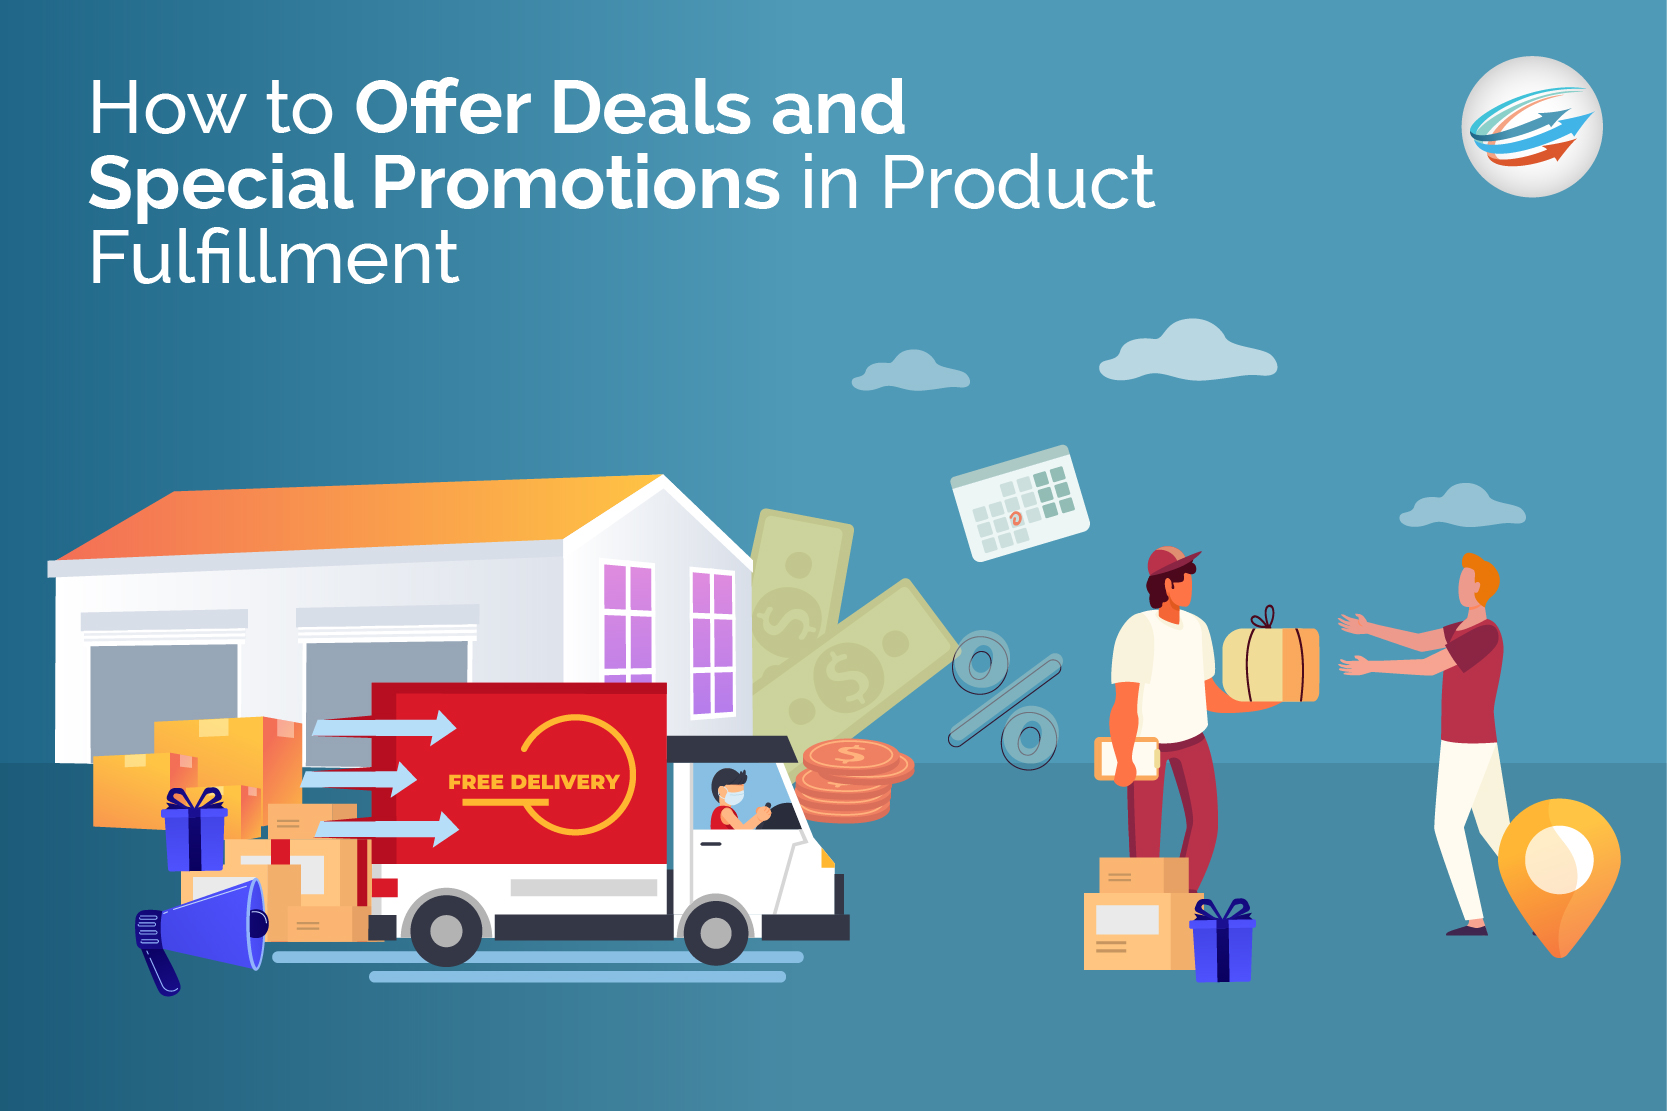 Offer Deals and Special Promotions in Product Fulfillment